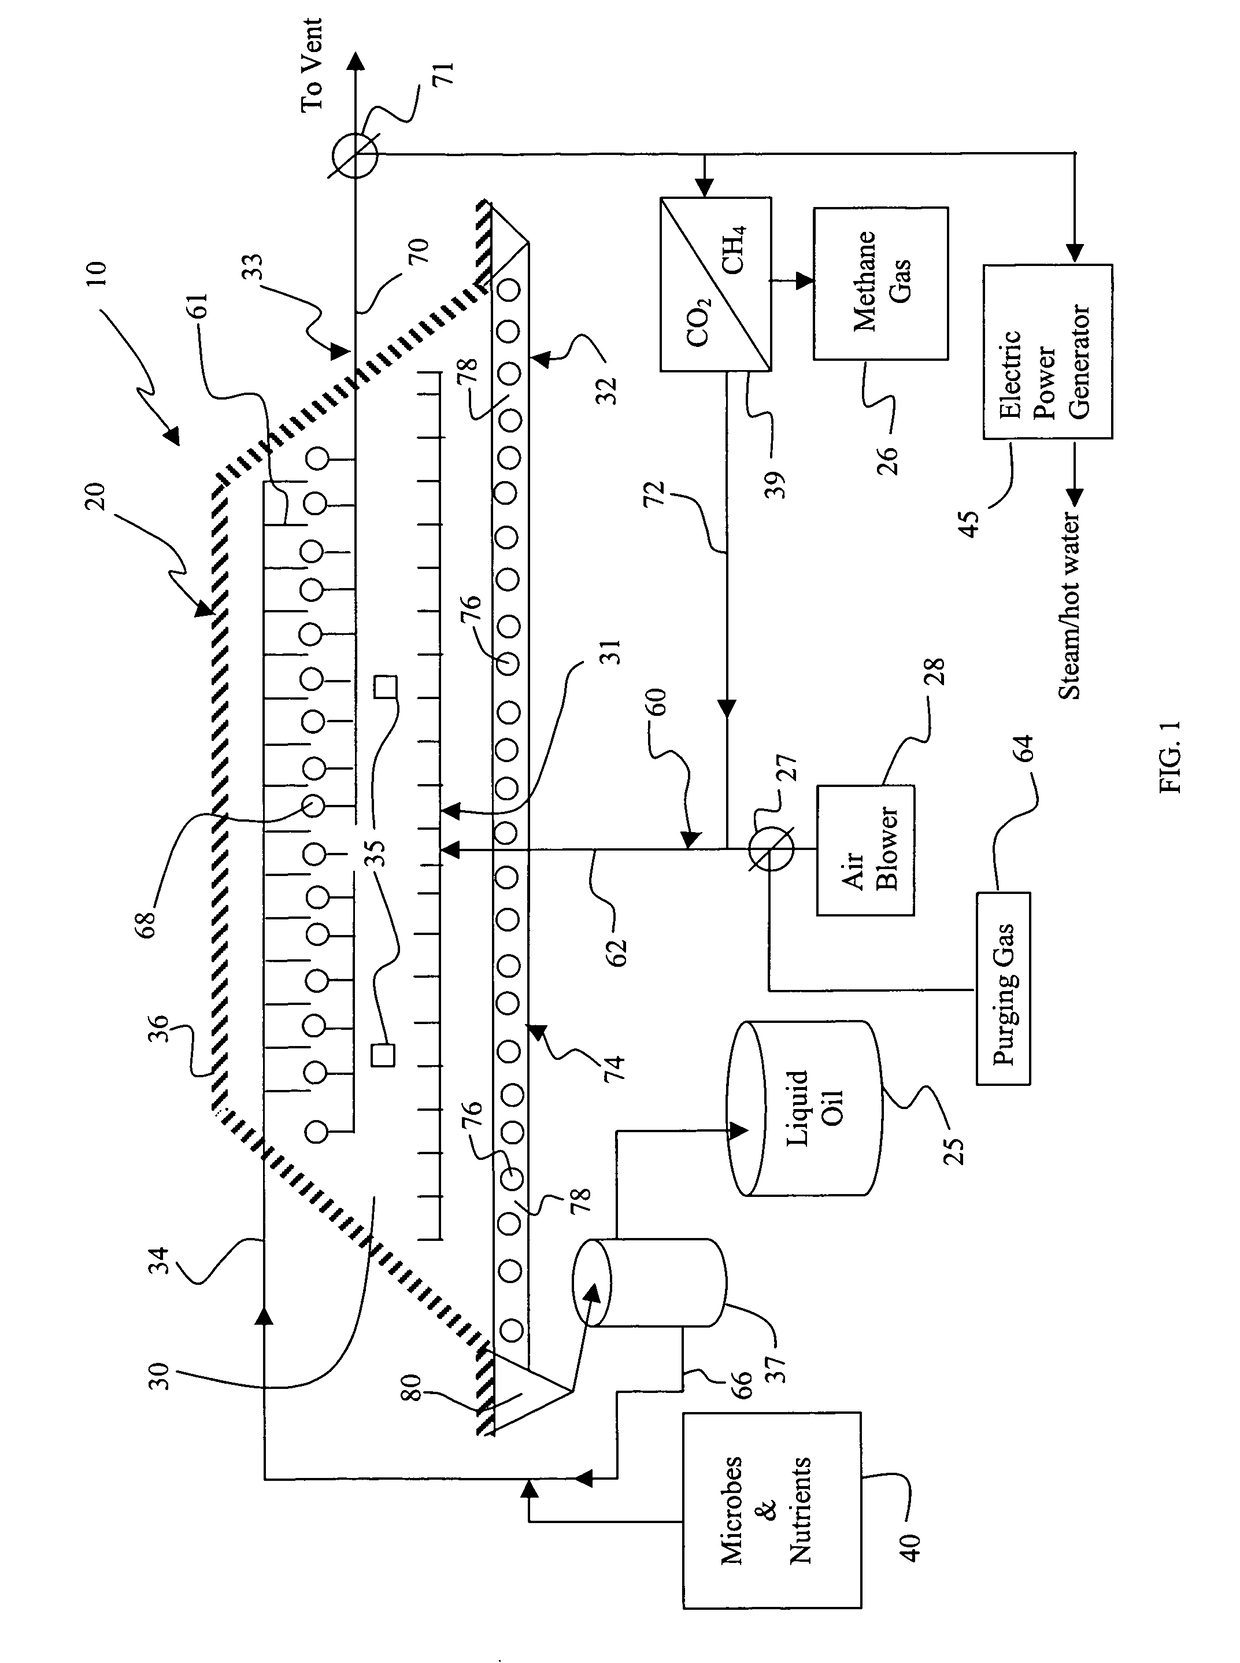 Method and bioreactor for producing synfuel from carbonaceous material